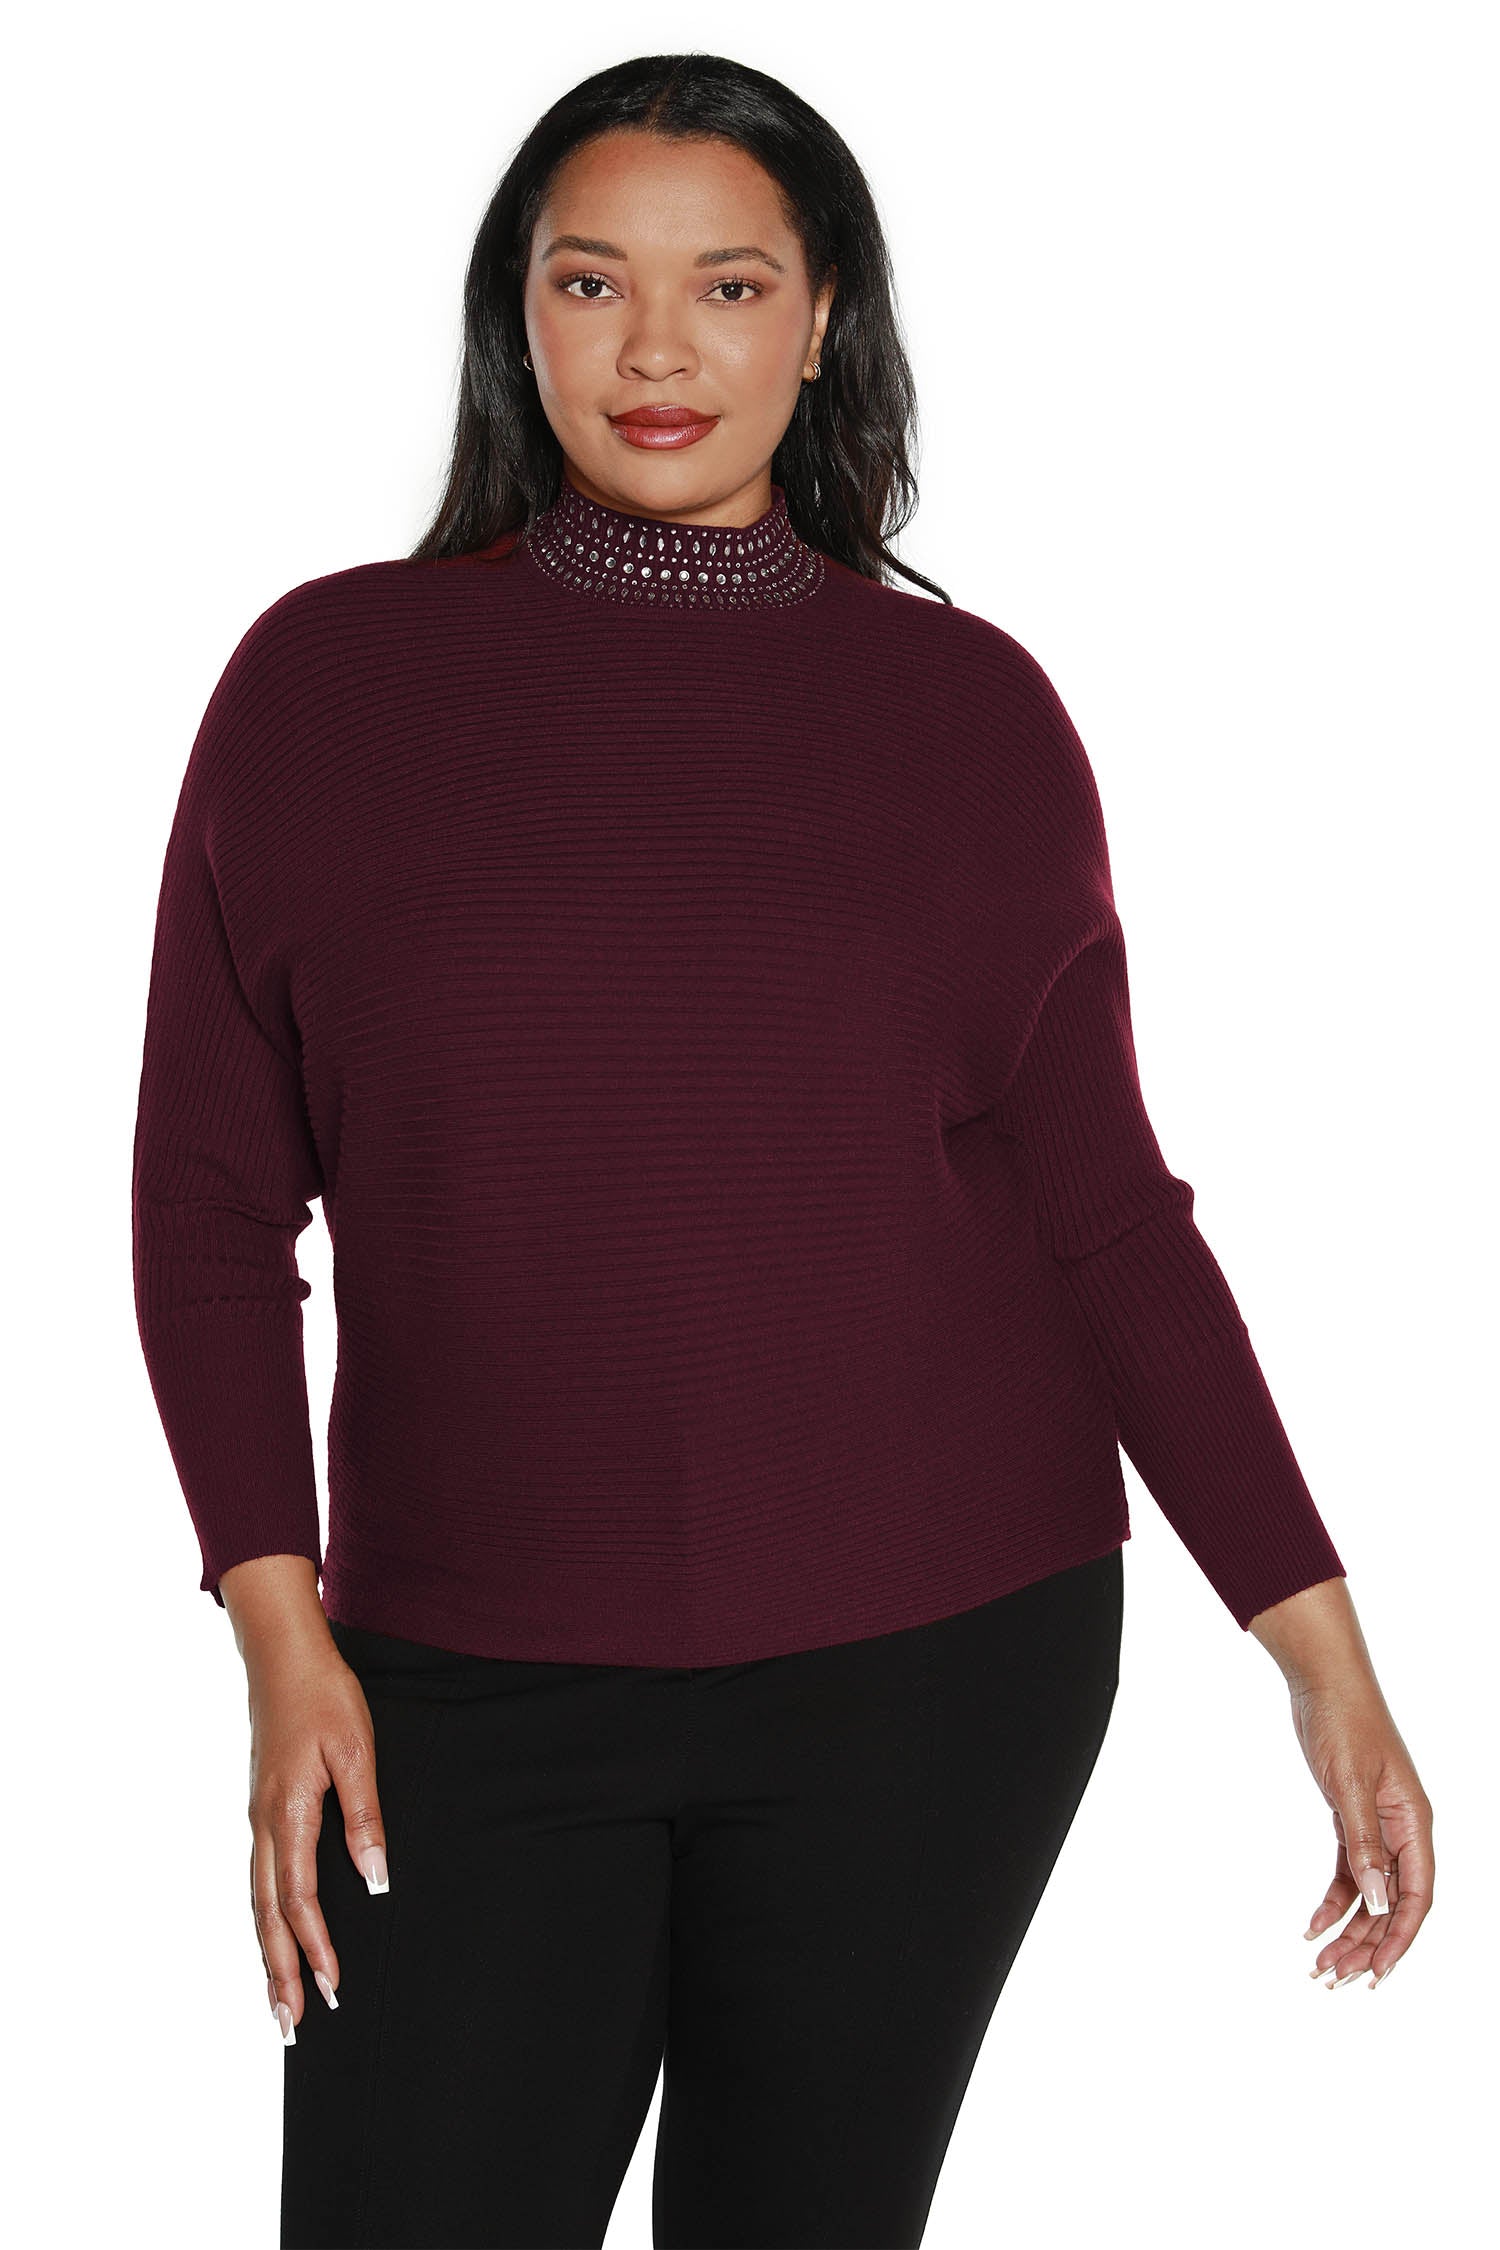 Women's Ribbed Knit Dolman with Mock Neck and Rhinestone Detailing | Curvy